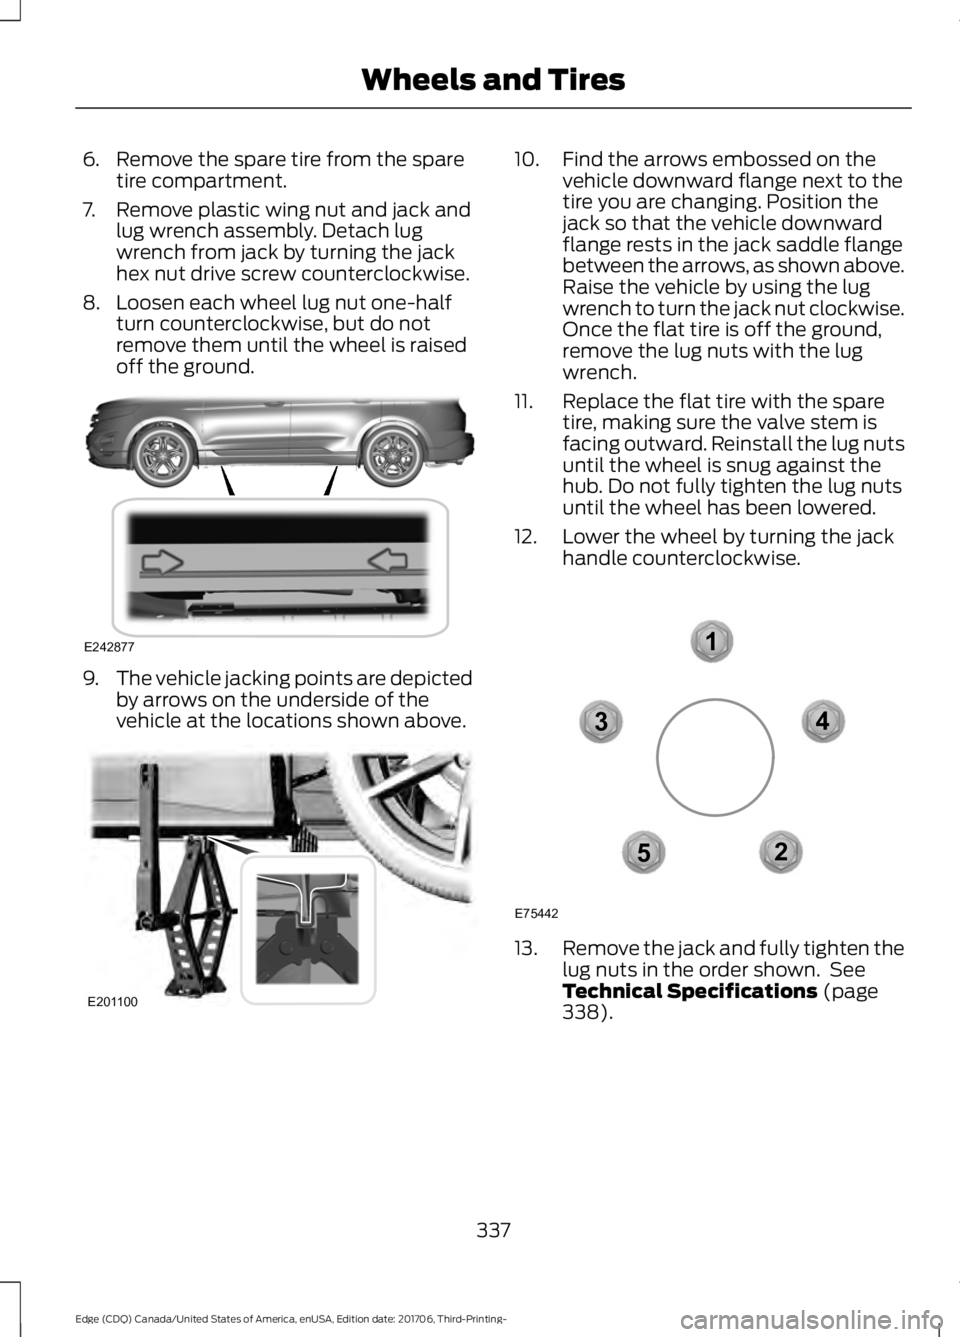 FORD EDGE 2018 User Guide 6. Remove the spare tire from the spare
tire compartment.
7. Remove plastic wing nut and jack and lug wrench assembly. Detach lug
wrench from jack by turning the jack
hex nut drive screw counterclockw